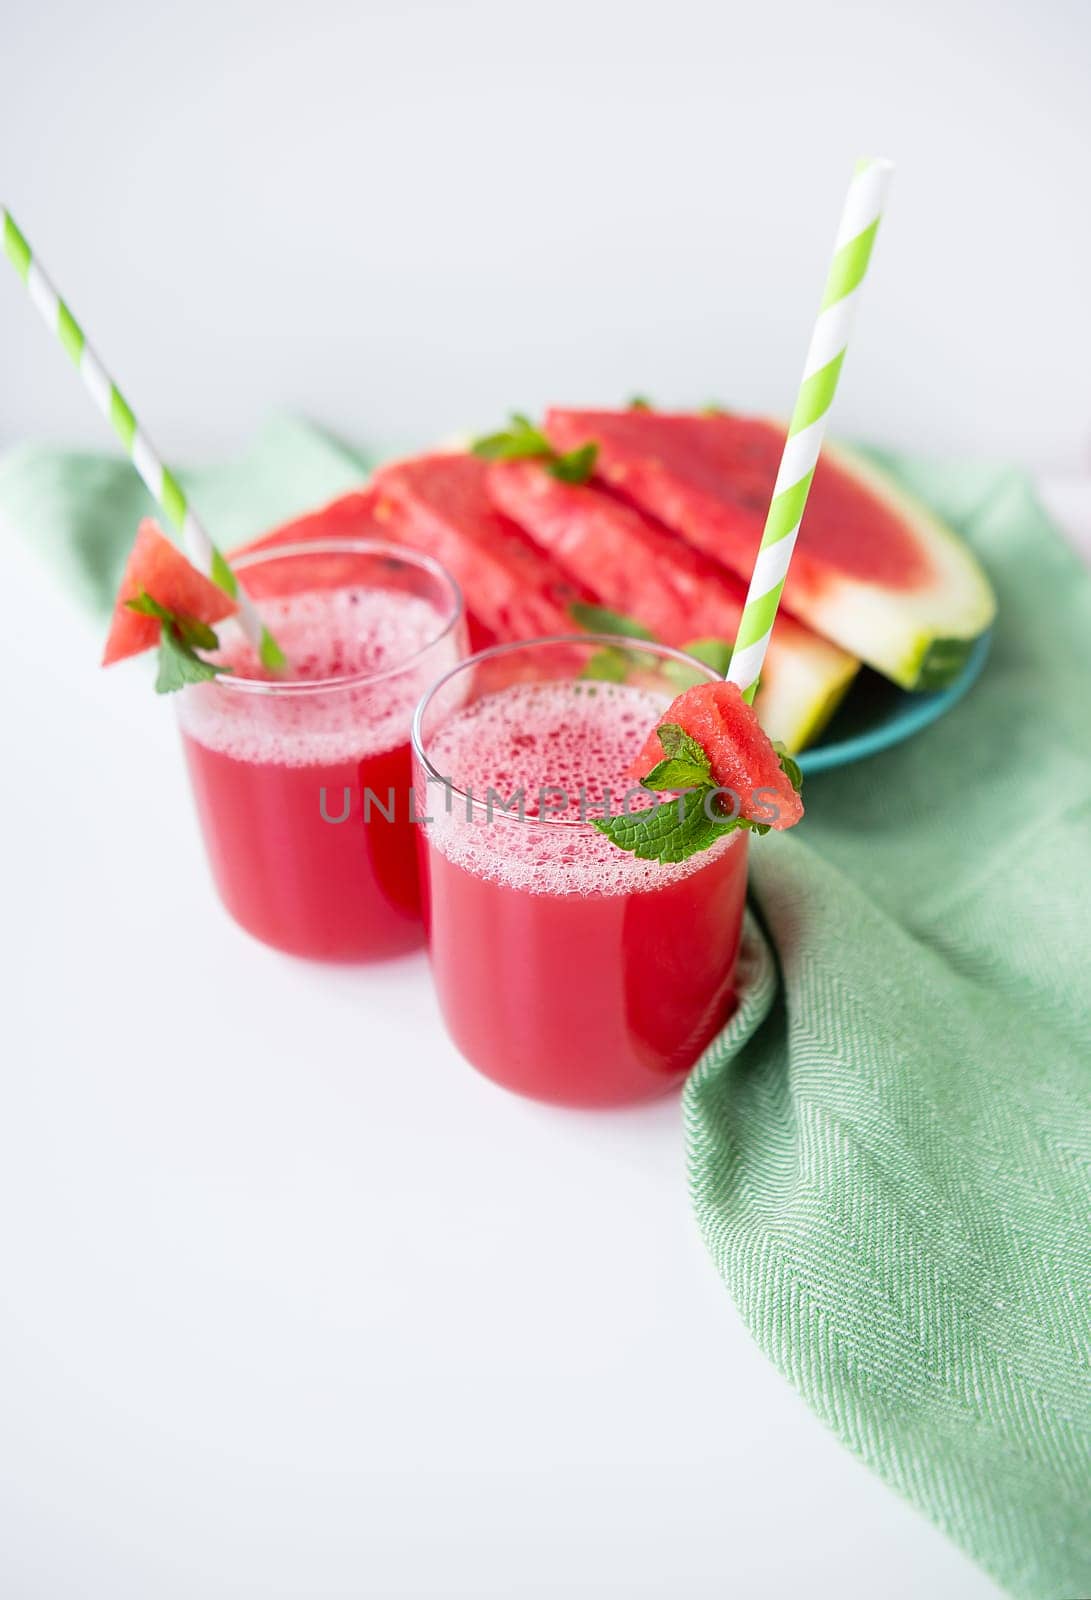 Juicy fresh watermelon juice in a glass along with a green tube, delicious and healthy summer food. by sfinks